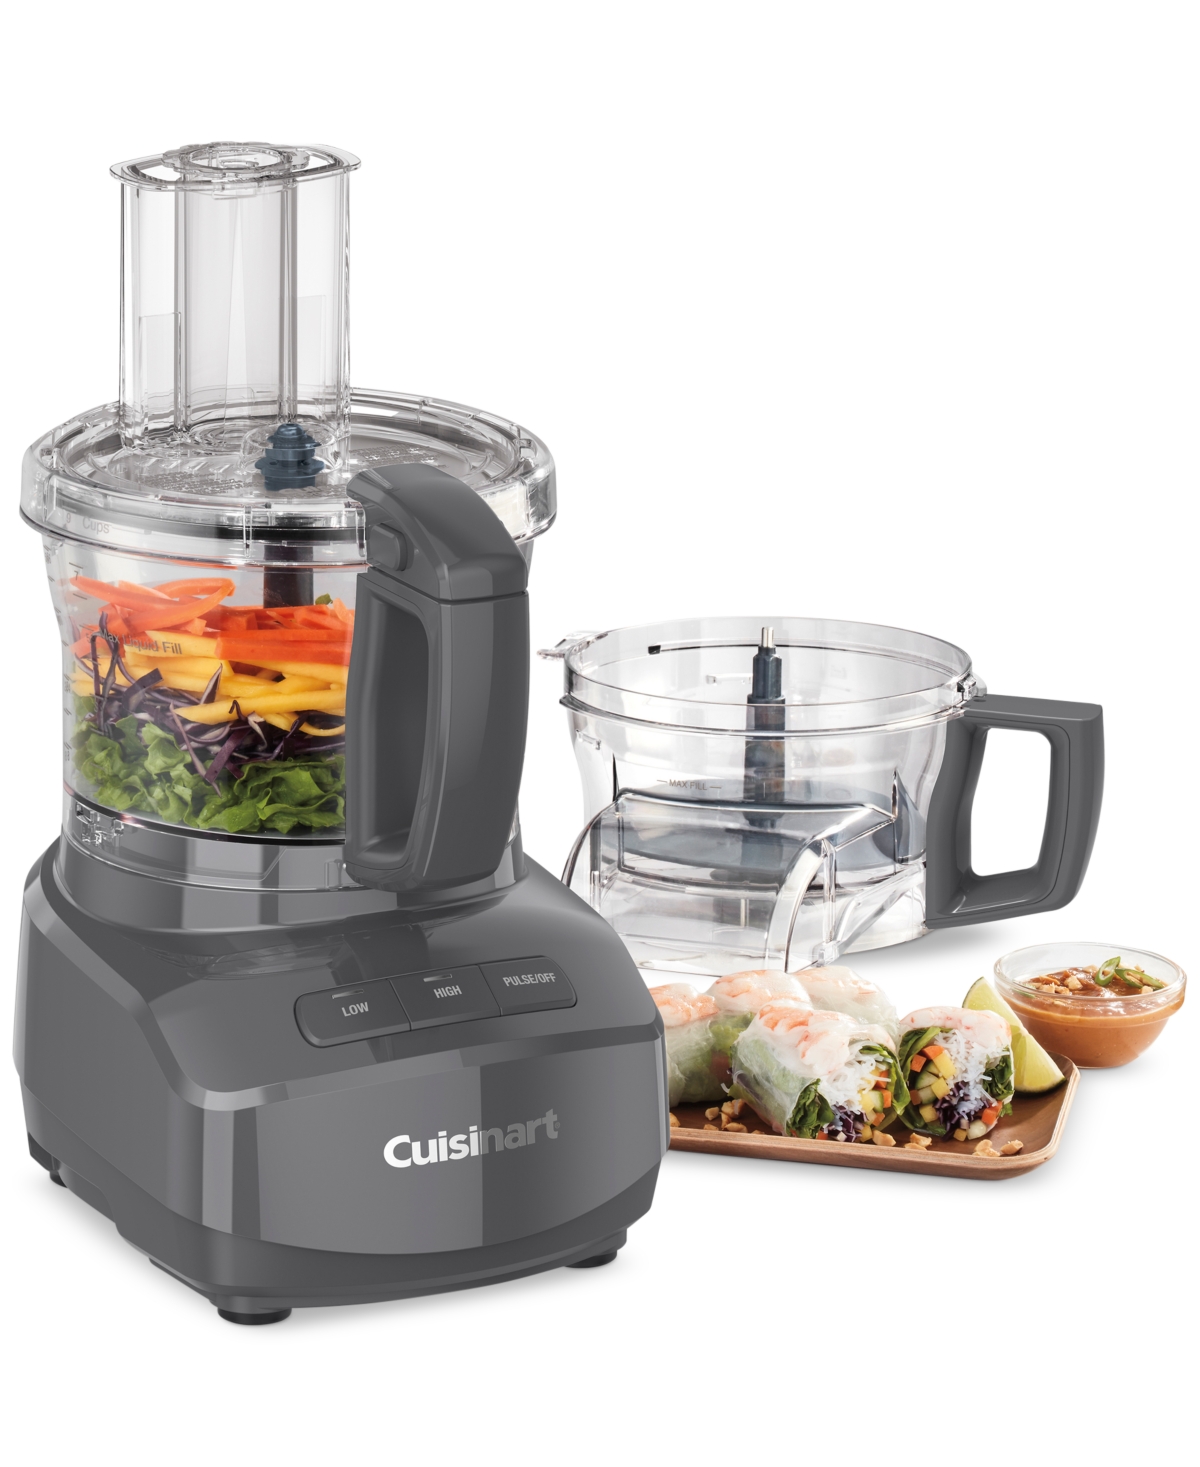 Cuisinart 9-cup Continuous Feed Food Processor In Anchor Gray